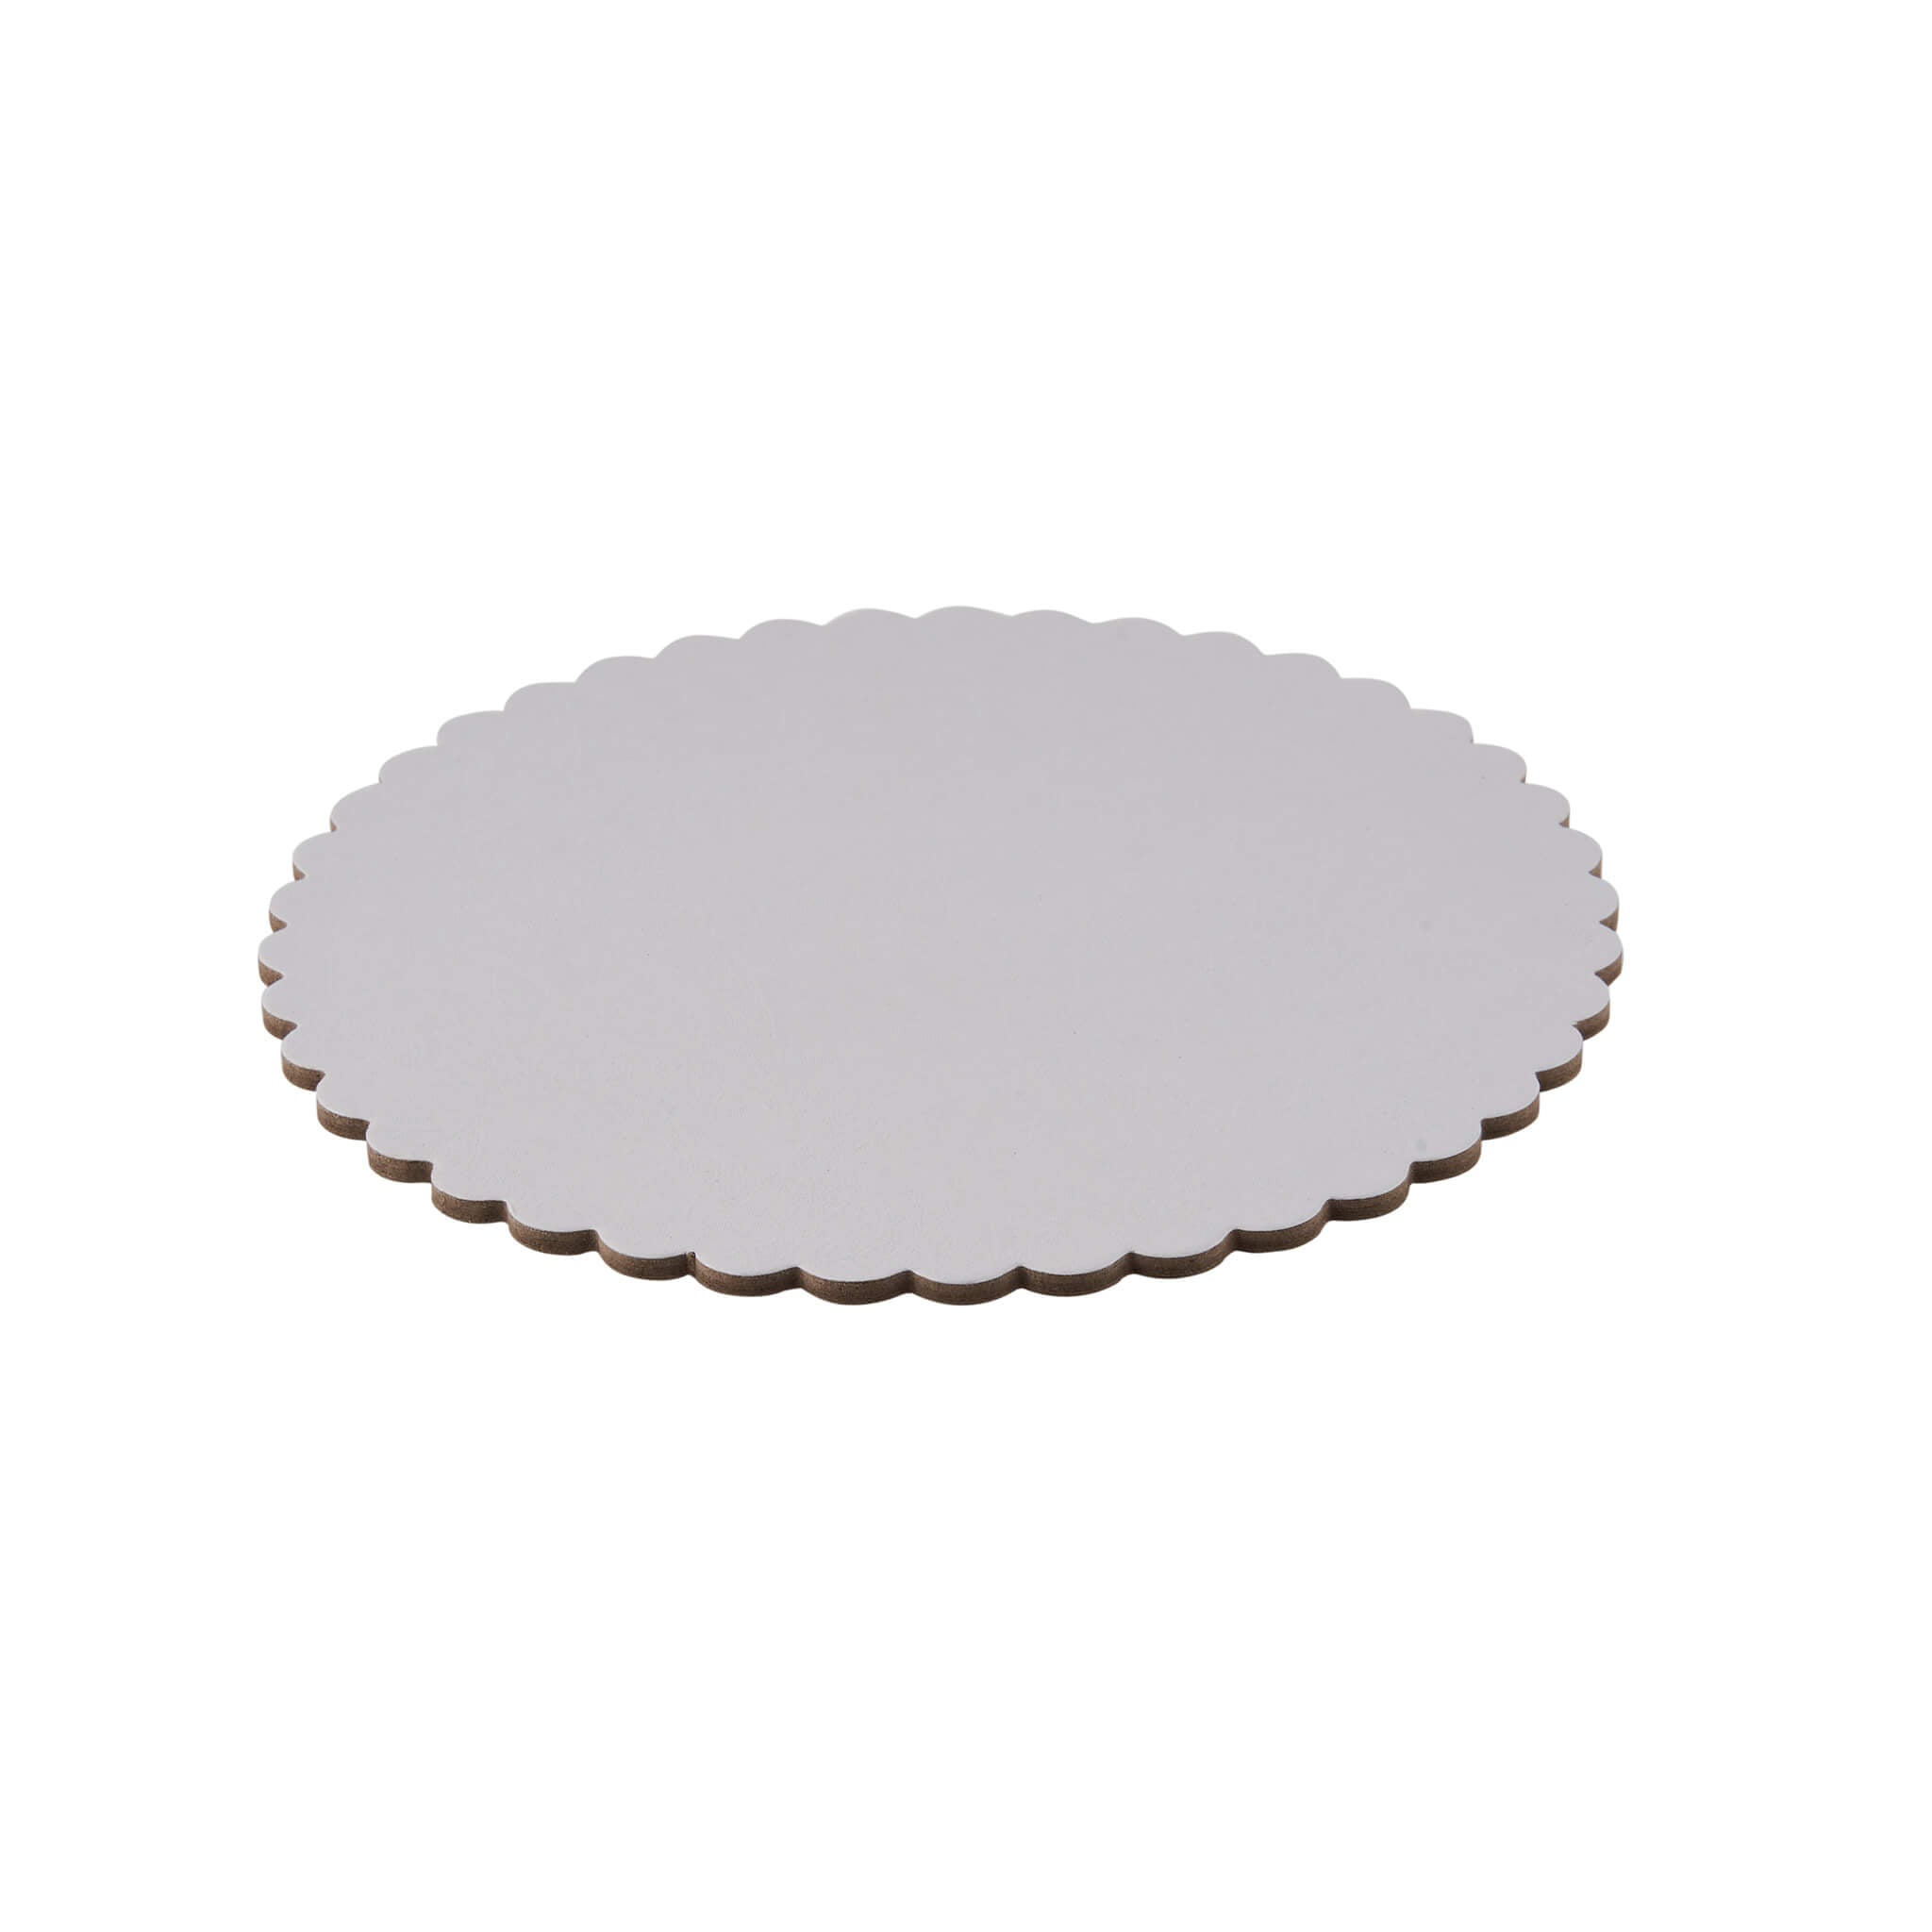 Baked With Love White Round Double Thick Cake Board 8 Inches | Hobbycraft